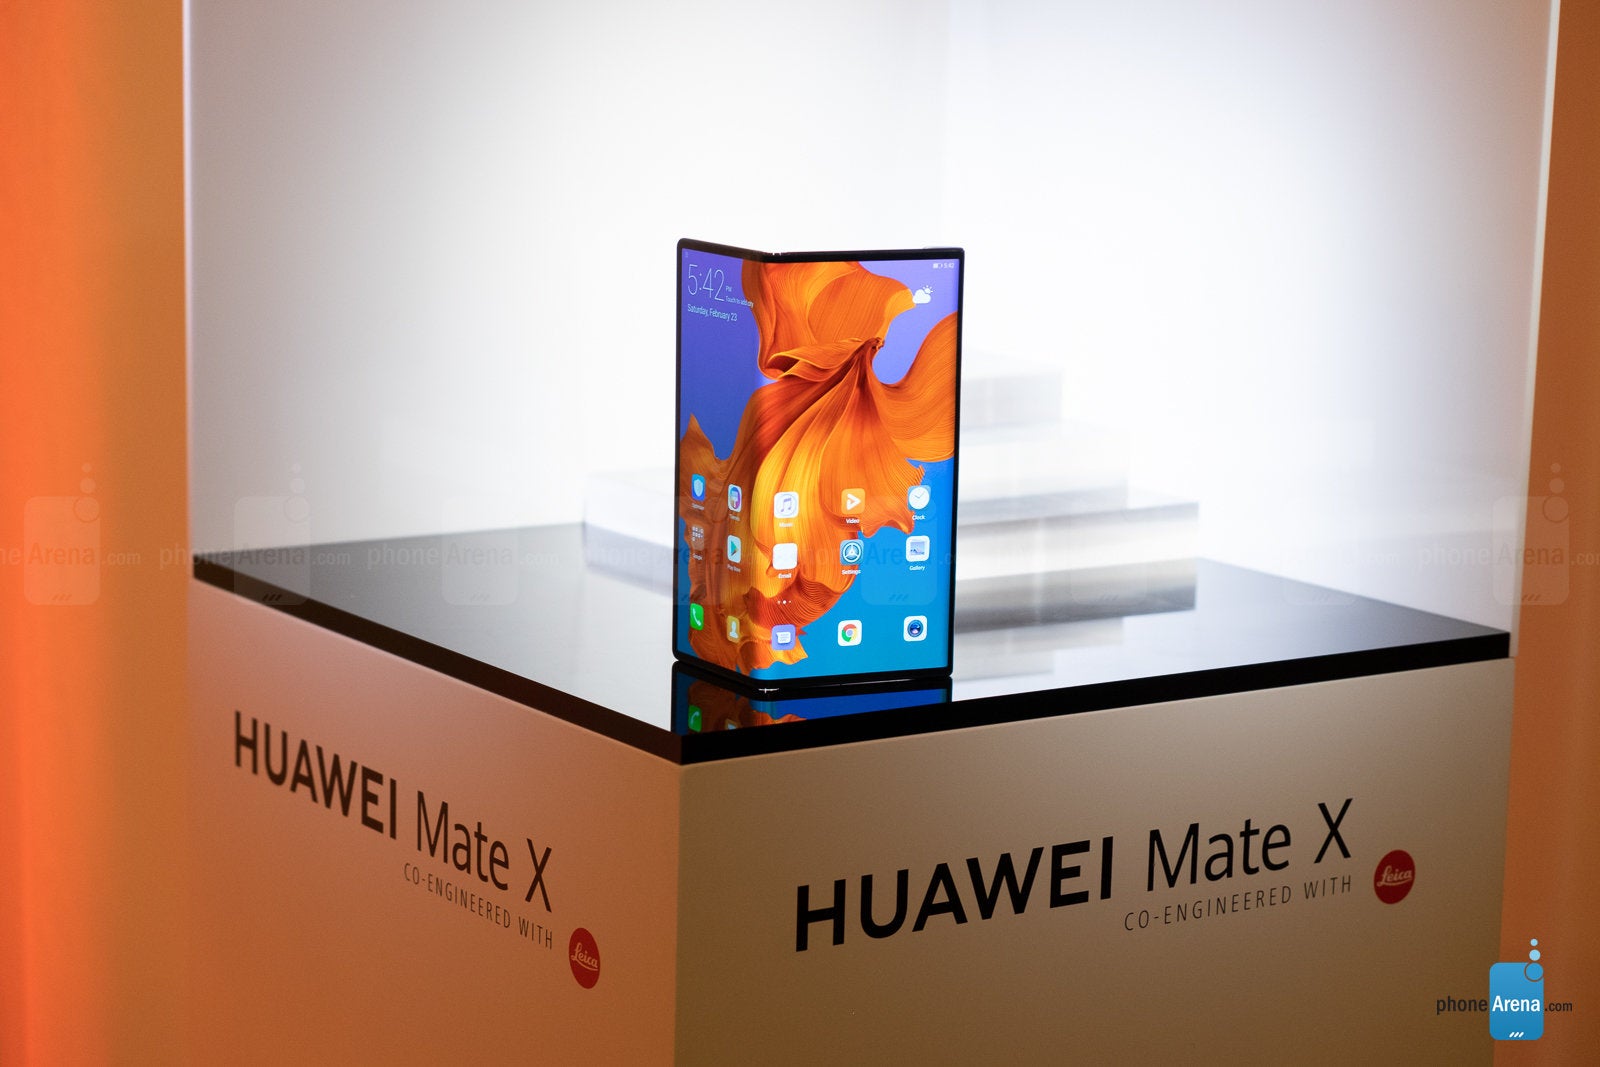 Huawei Mate X: first look at the foldable phone of the future